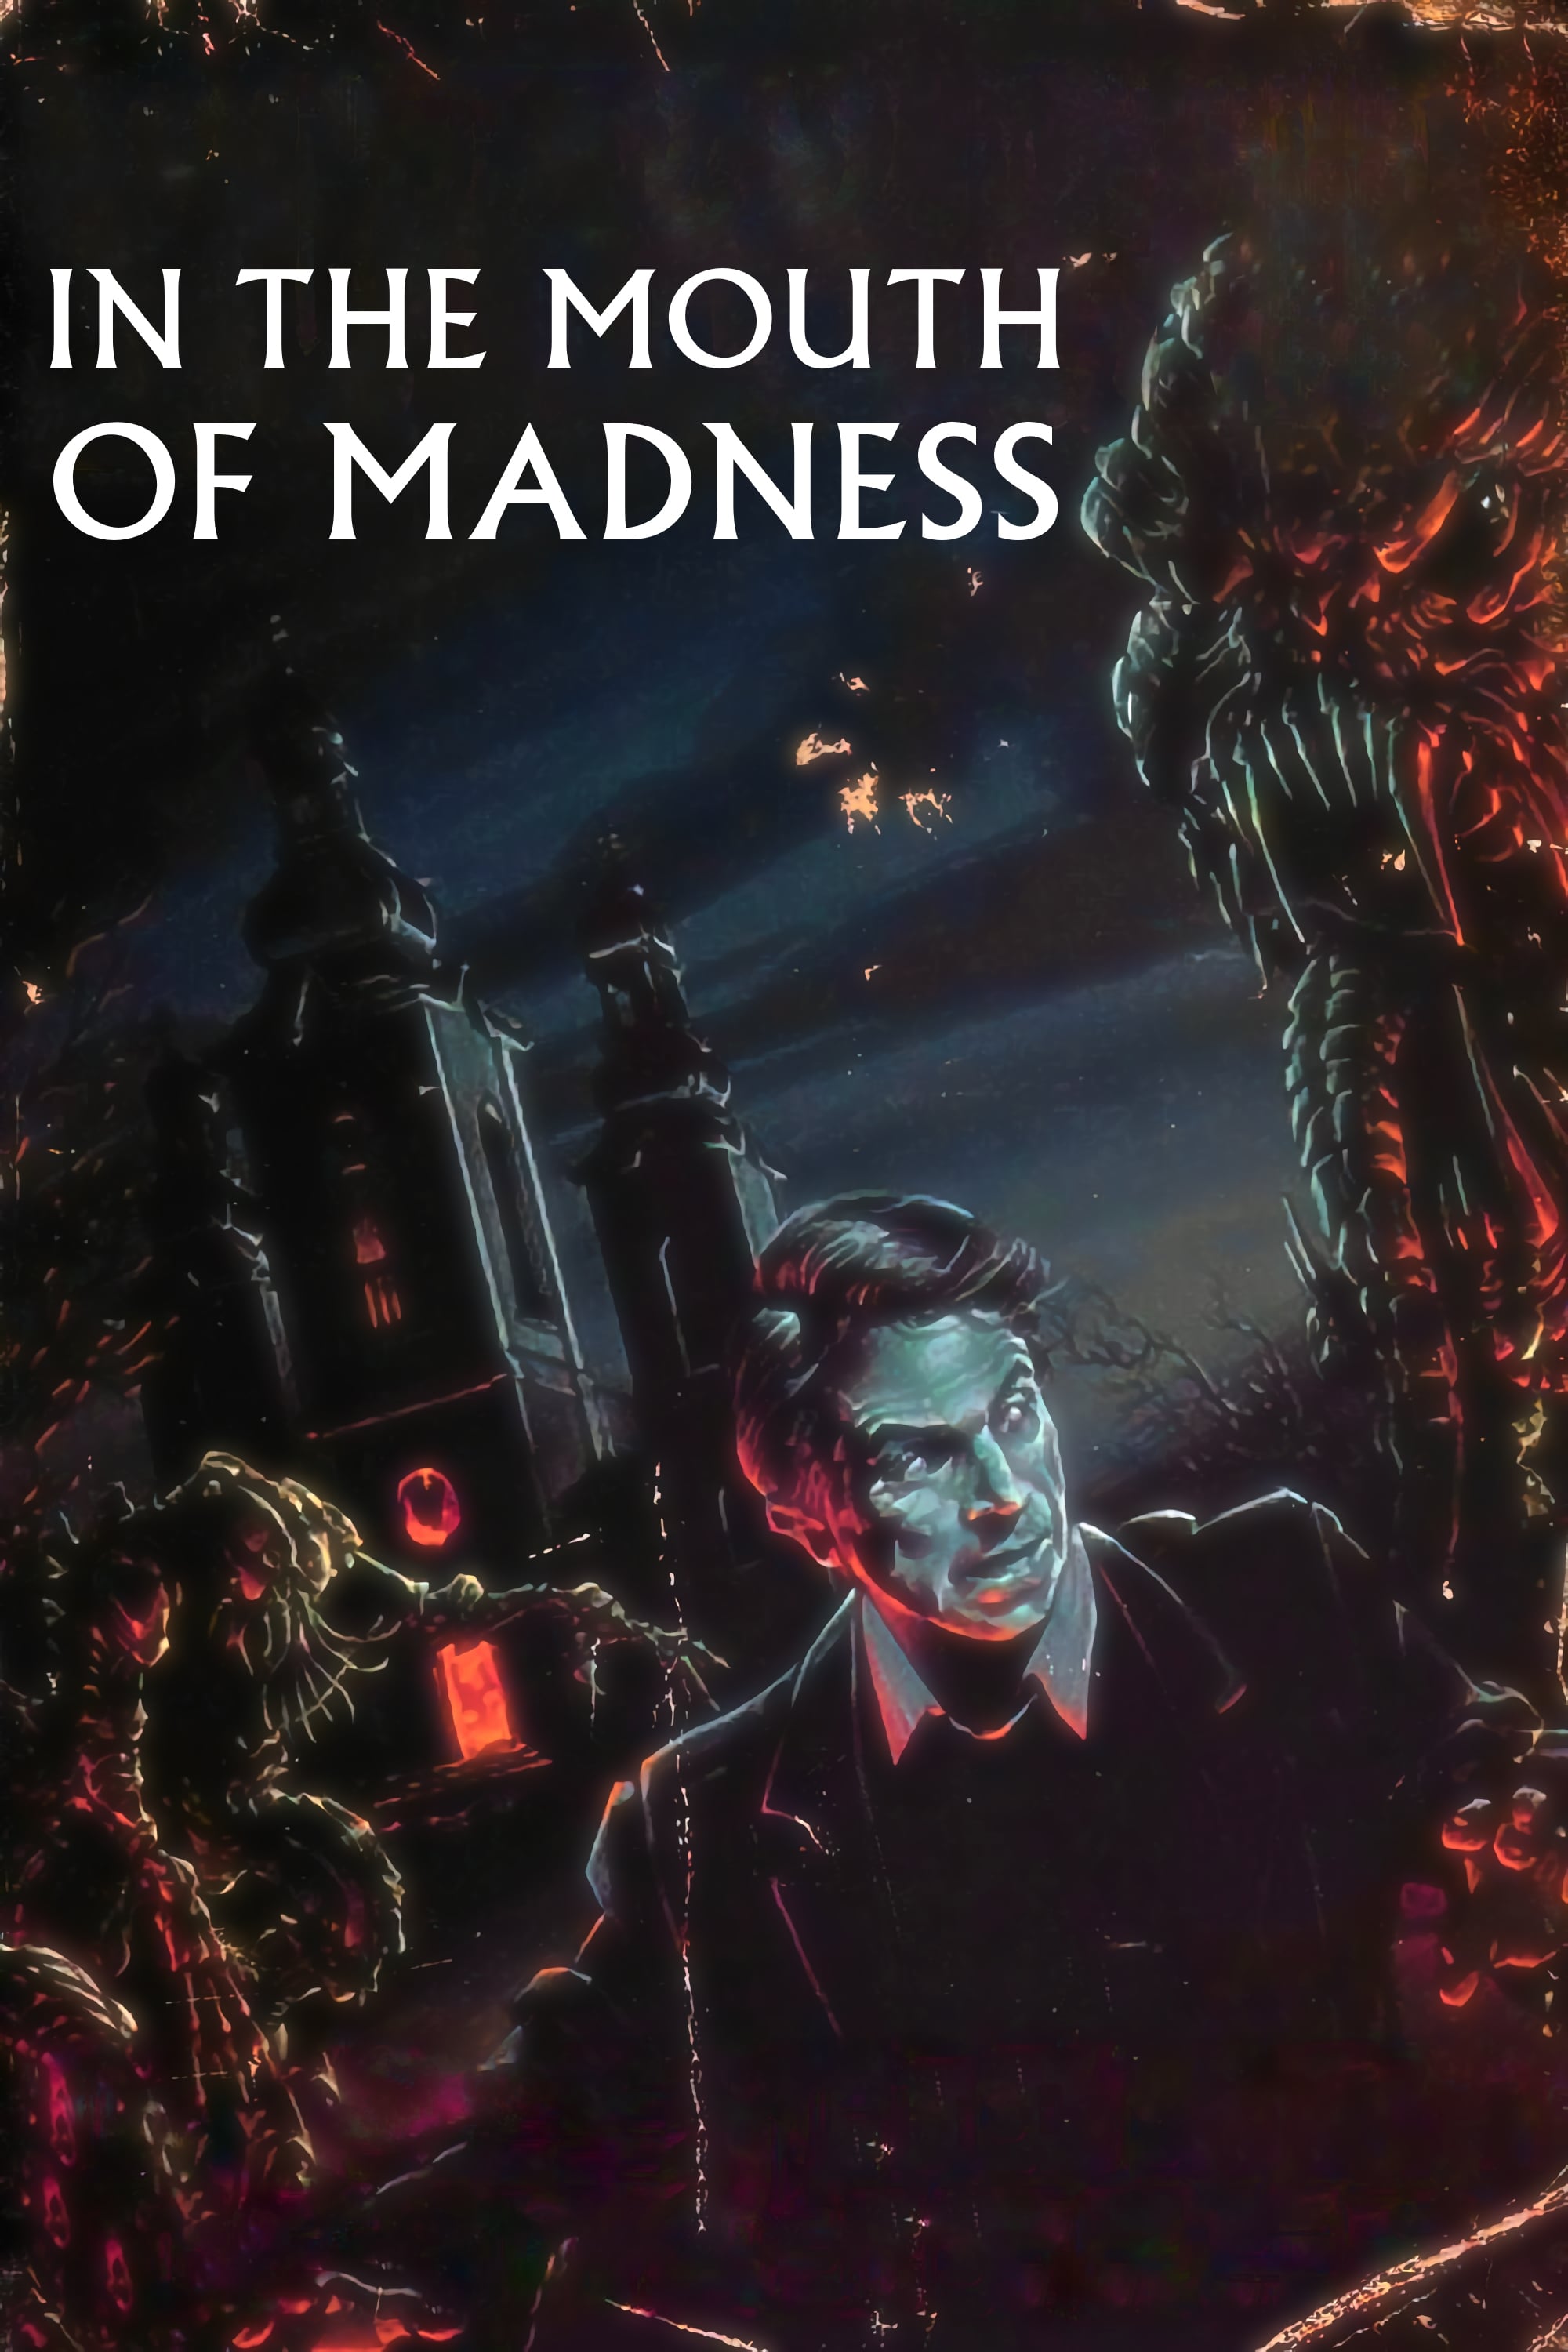 In the Mouth of Madness (1995)